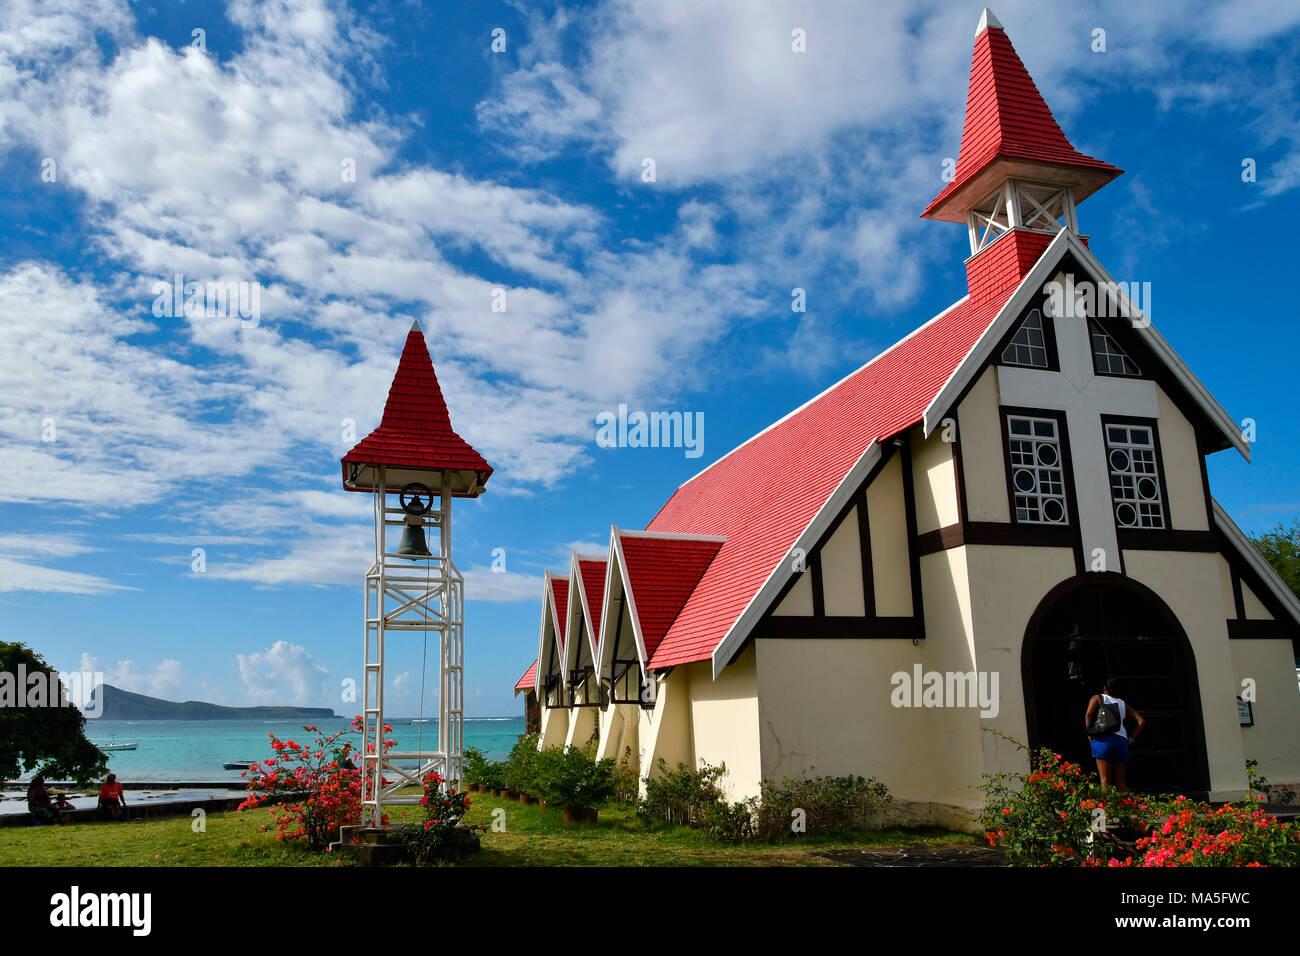 Christian church with red roof, Mauritius,(Mauritian) Stock Photo